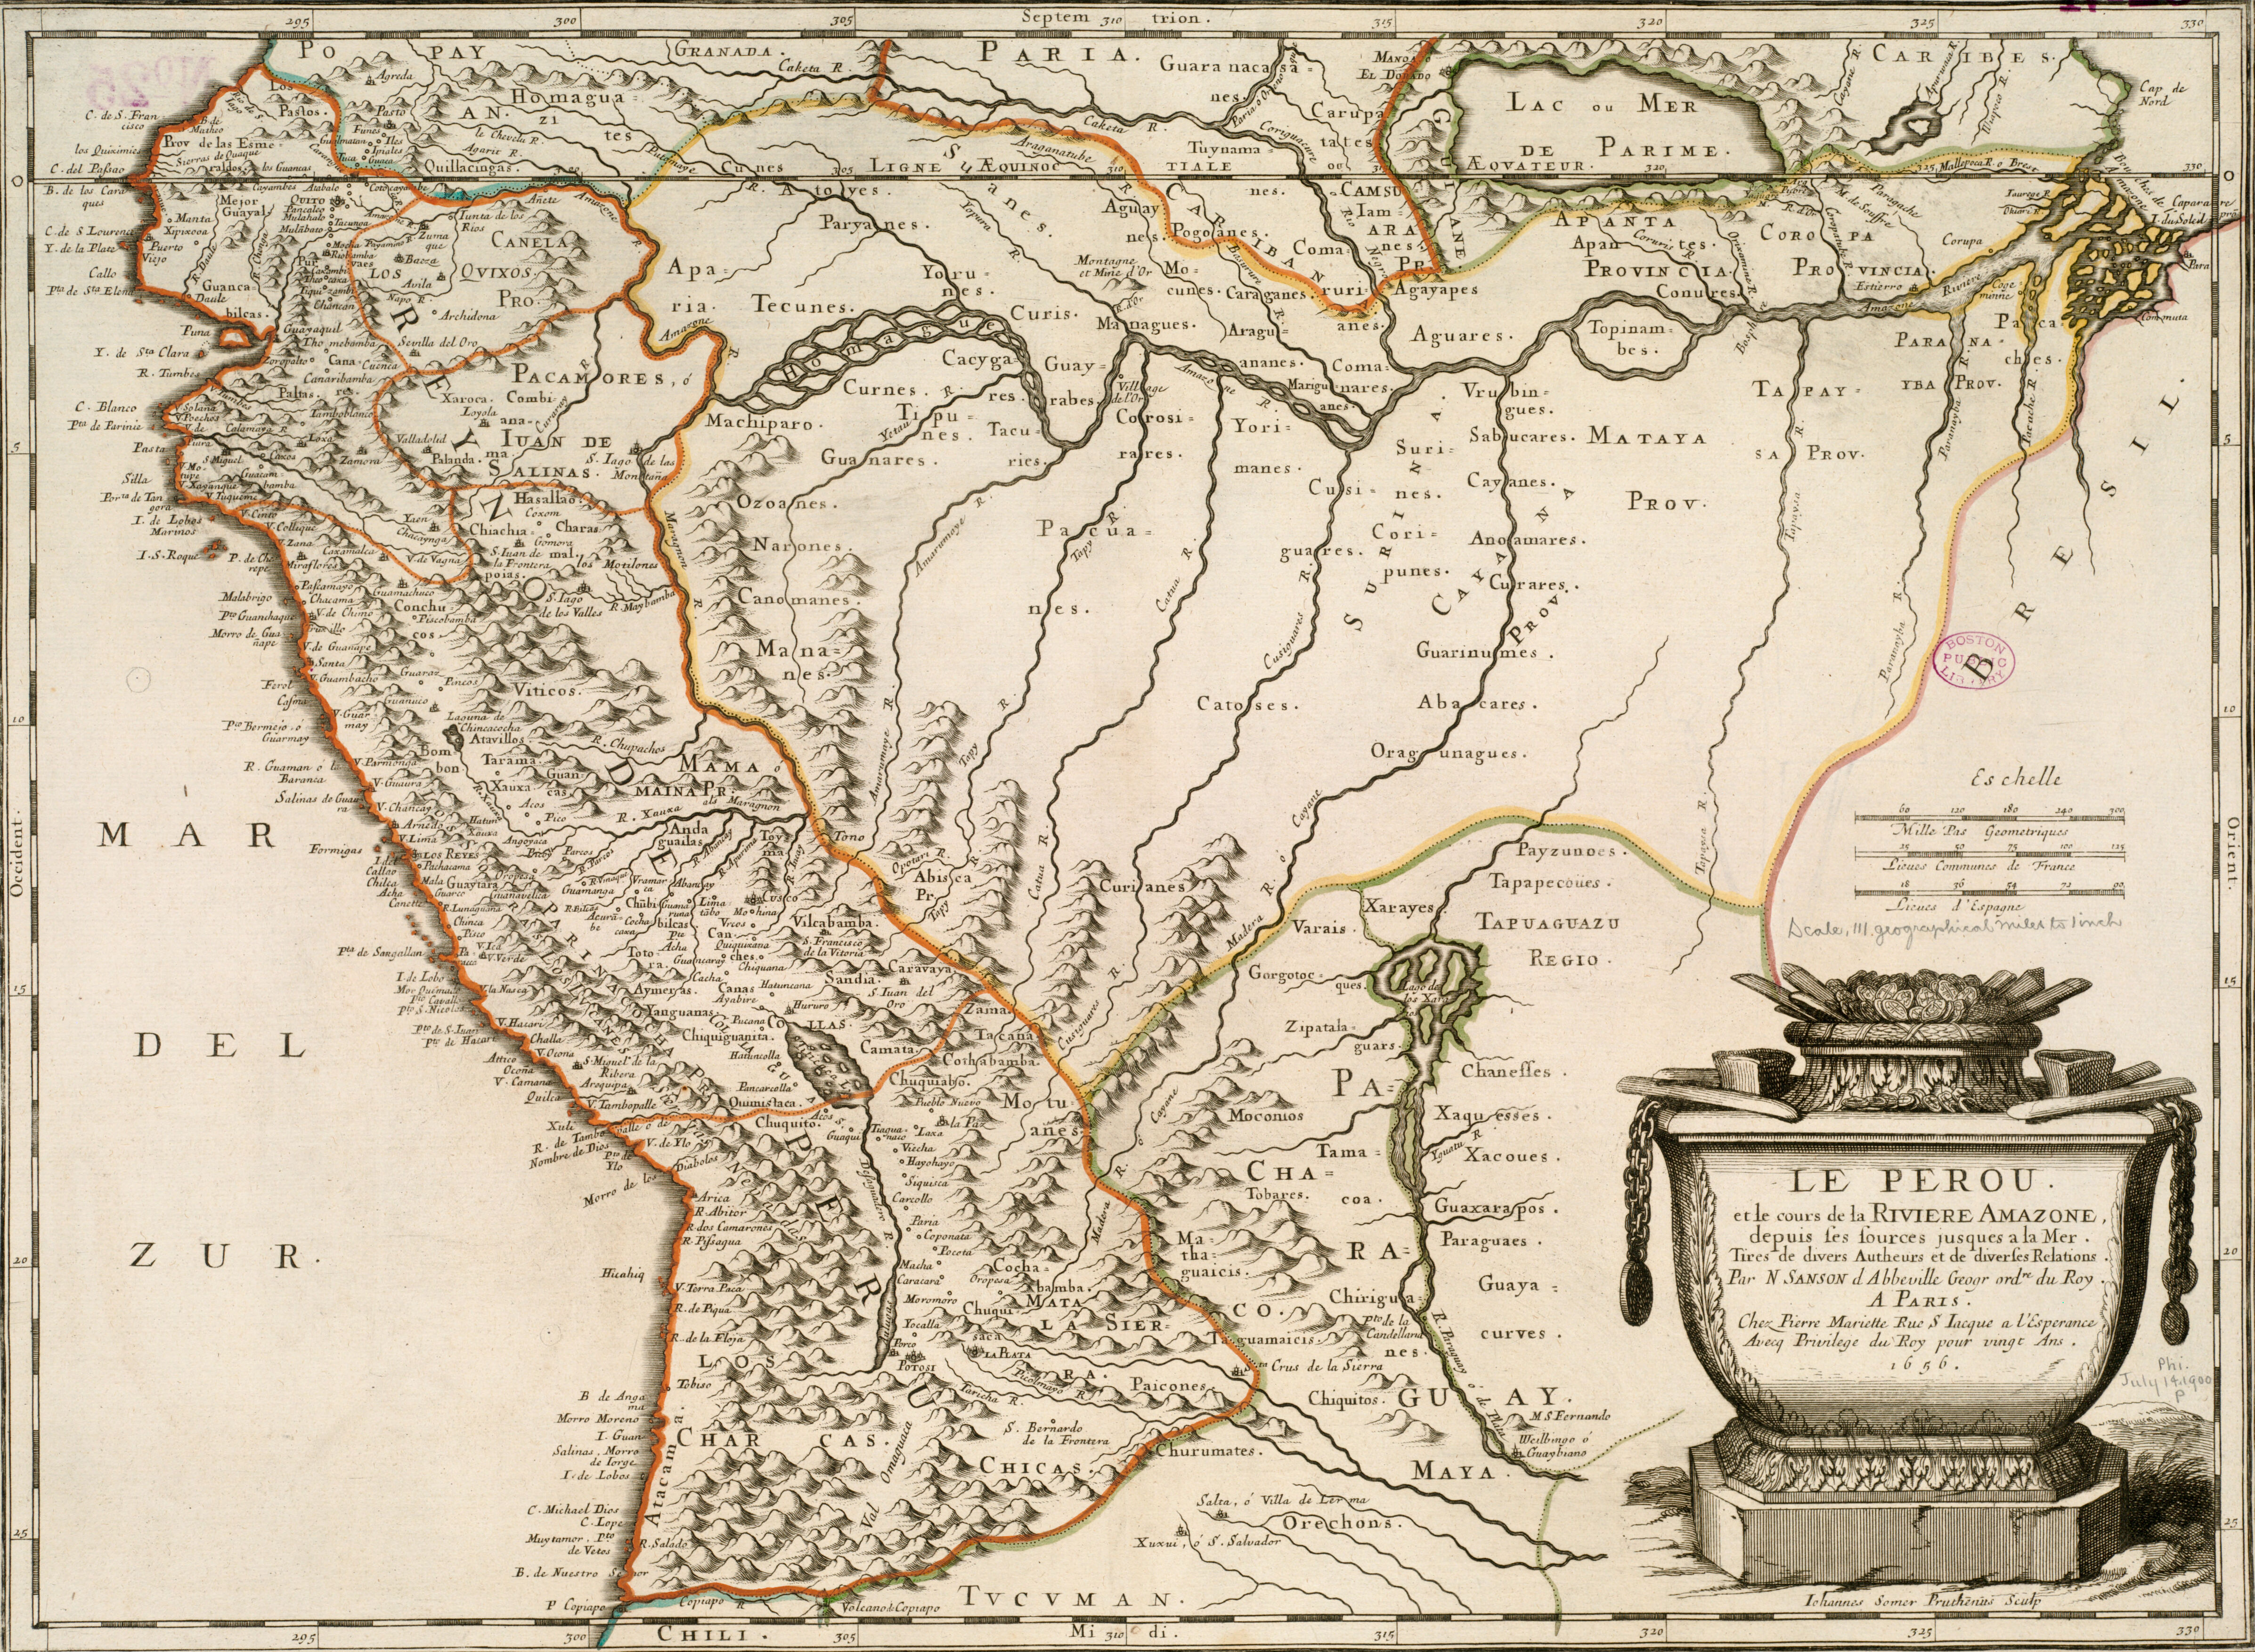 This 1656 map of Peru charts the course of the Amazon.